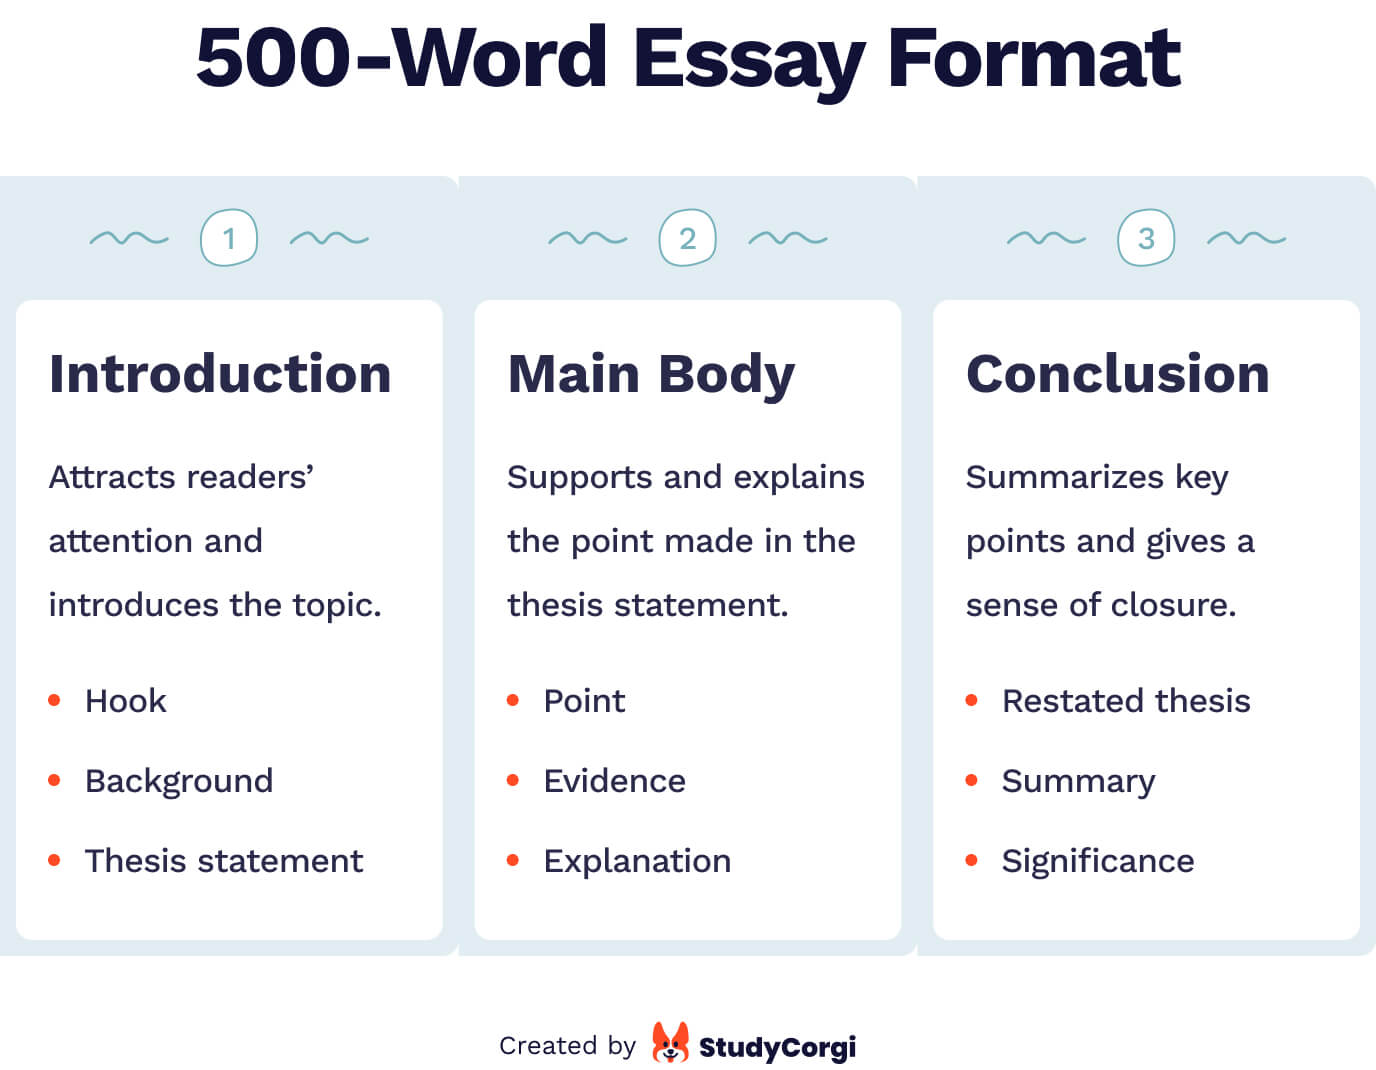 how long is an 500 word essay